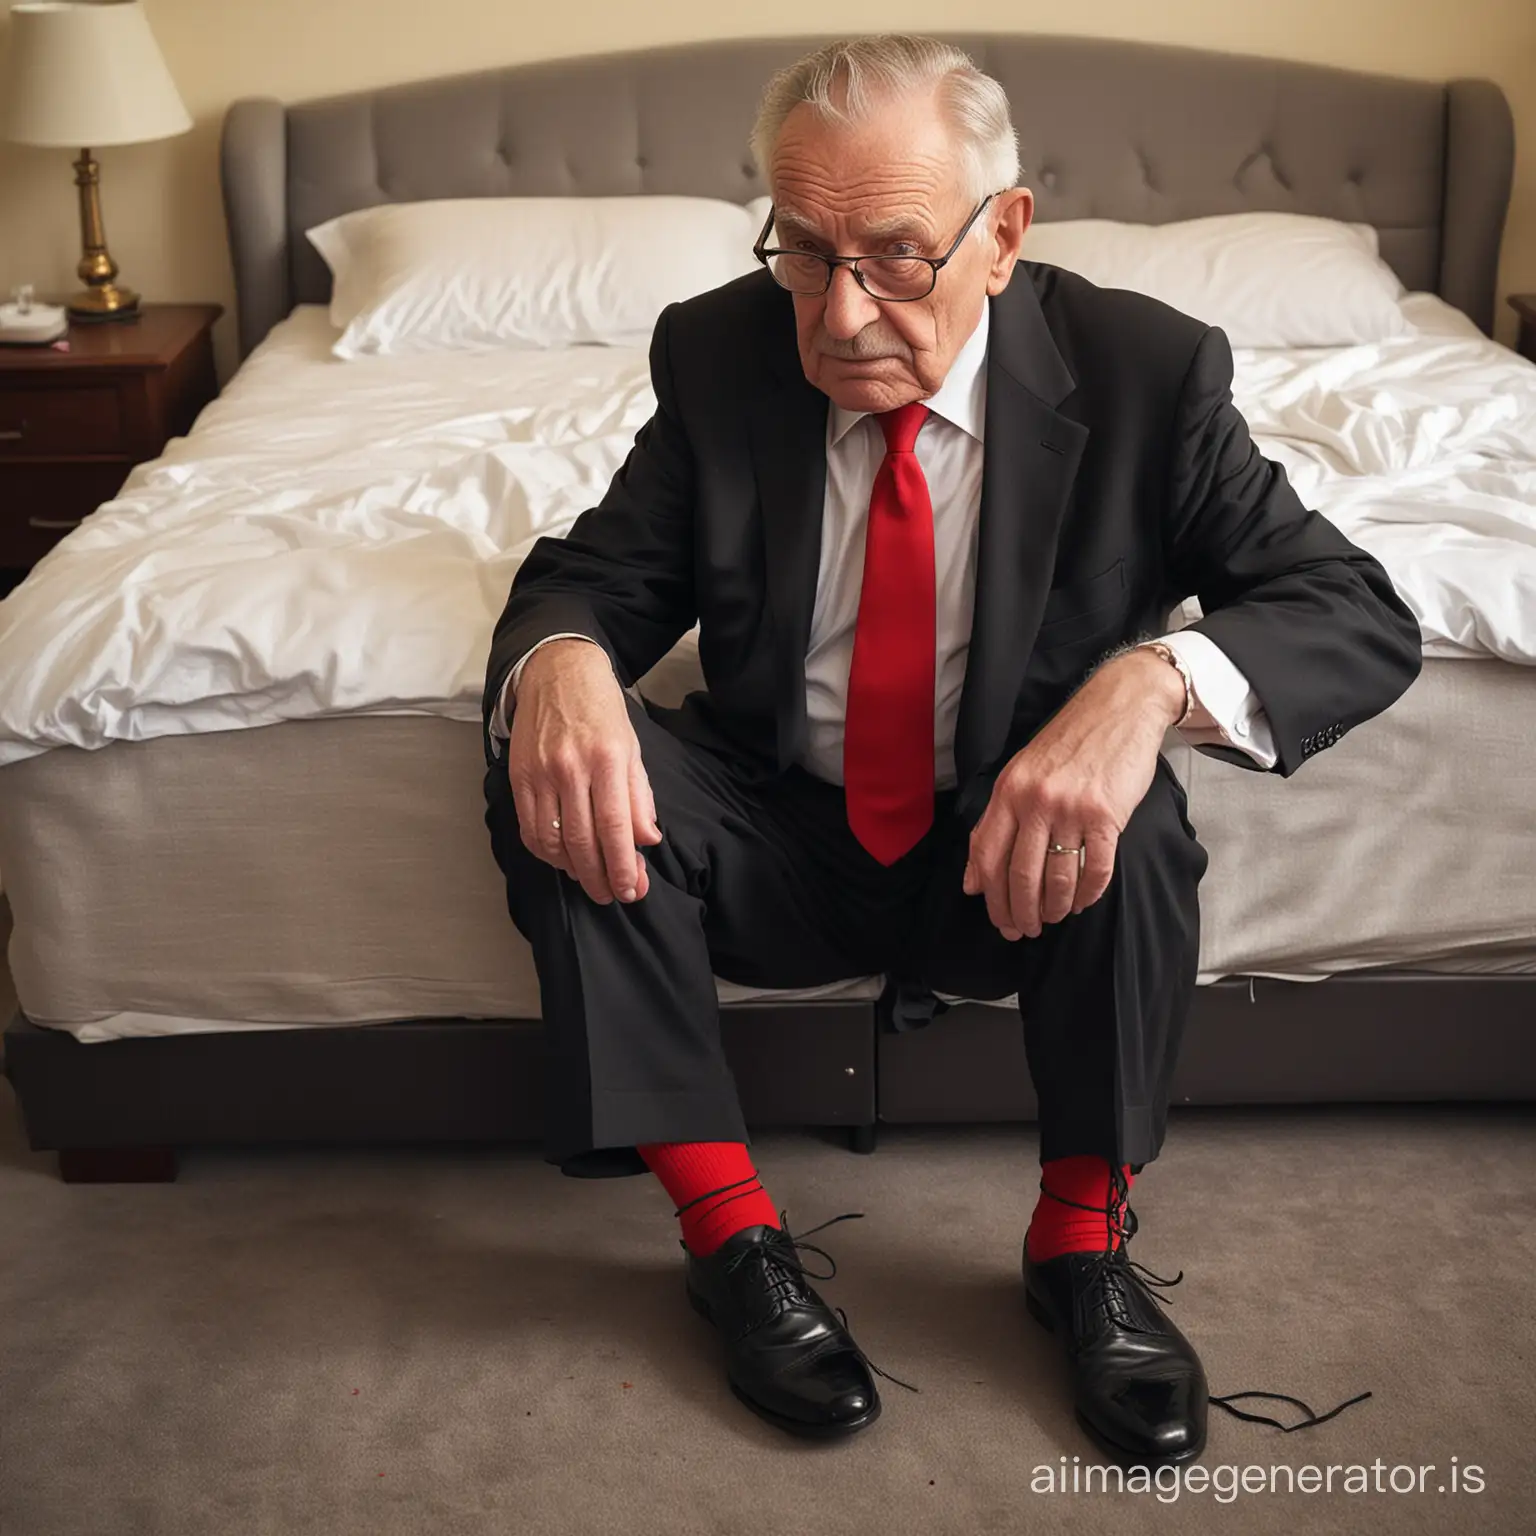 Elderly-Man-Tied-to-Bed-in-Distress-Helpless-Senior-in-Black-Suit-and-Red-Socks